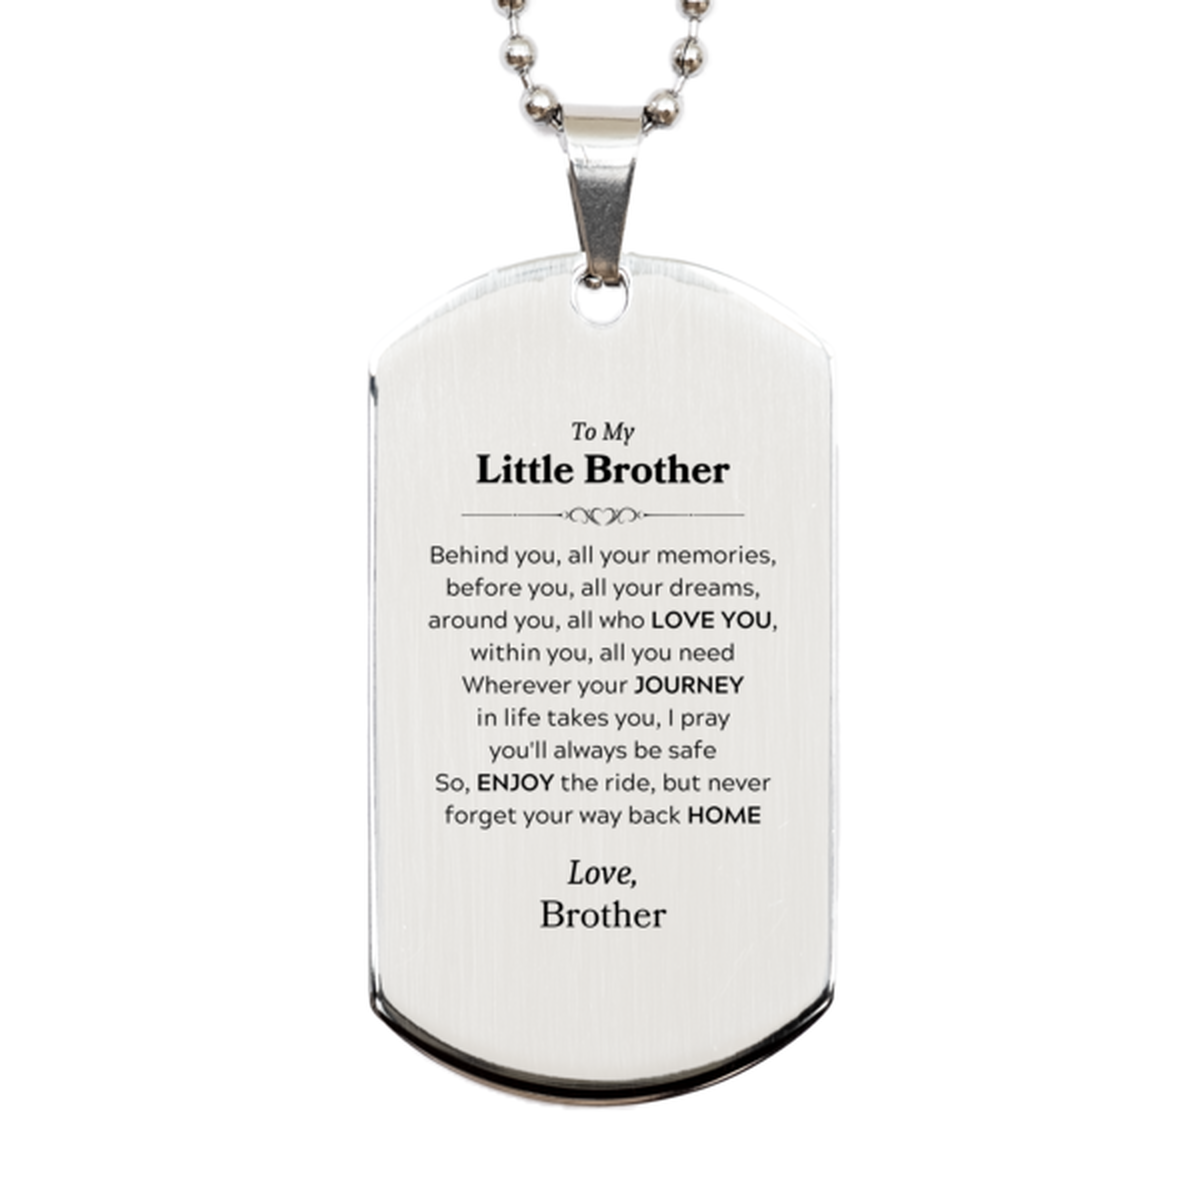 To My Little Brother Graduation Gifts from Brother, Little Brother Silver Dog Tag Christmas Birthday Gifts for Little Brother Behind you, all your memories, before you, all your dreams. Love, Brother